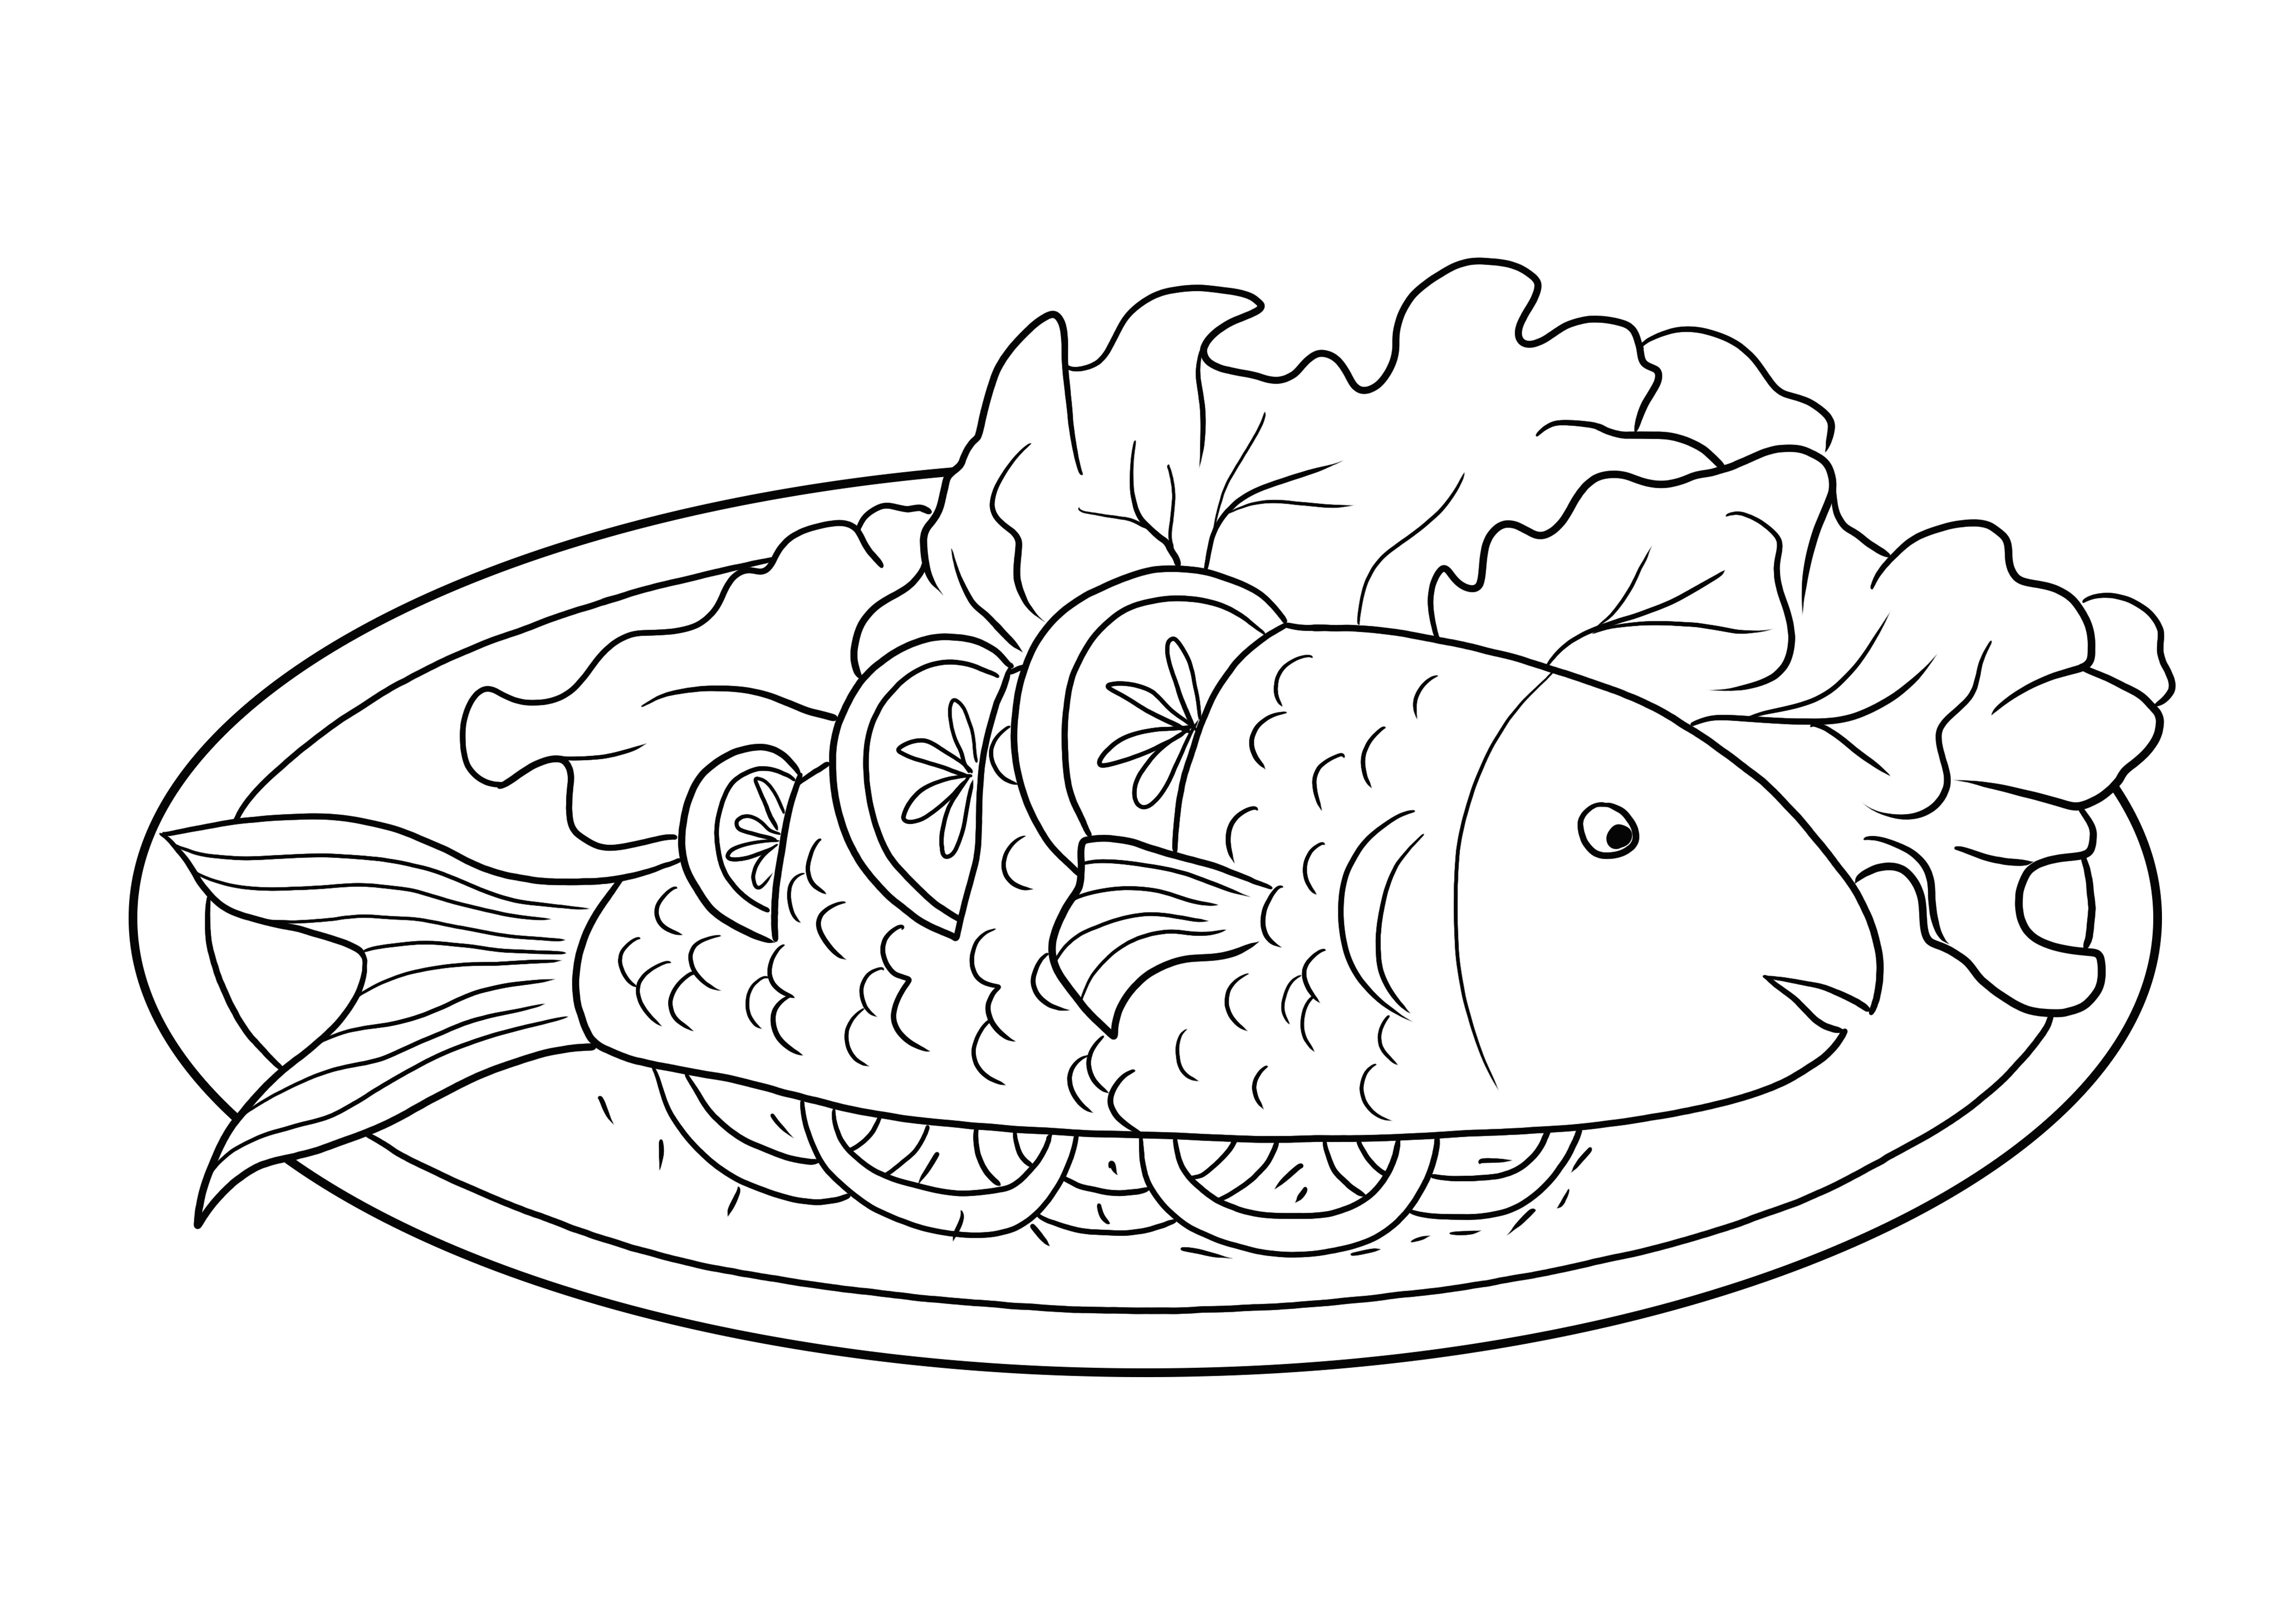 Cooked fish with lemon-easy coloring for kids to learn to color with fun